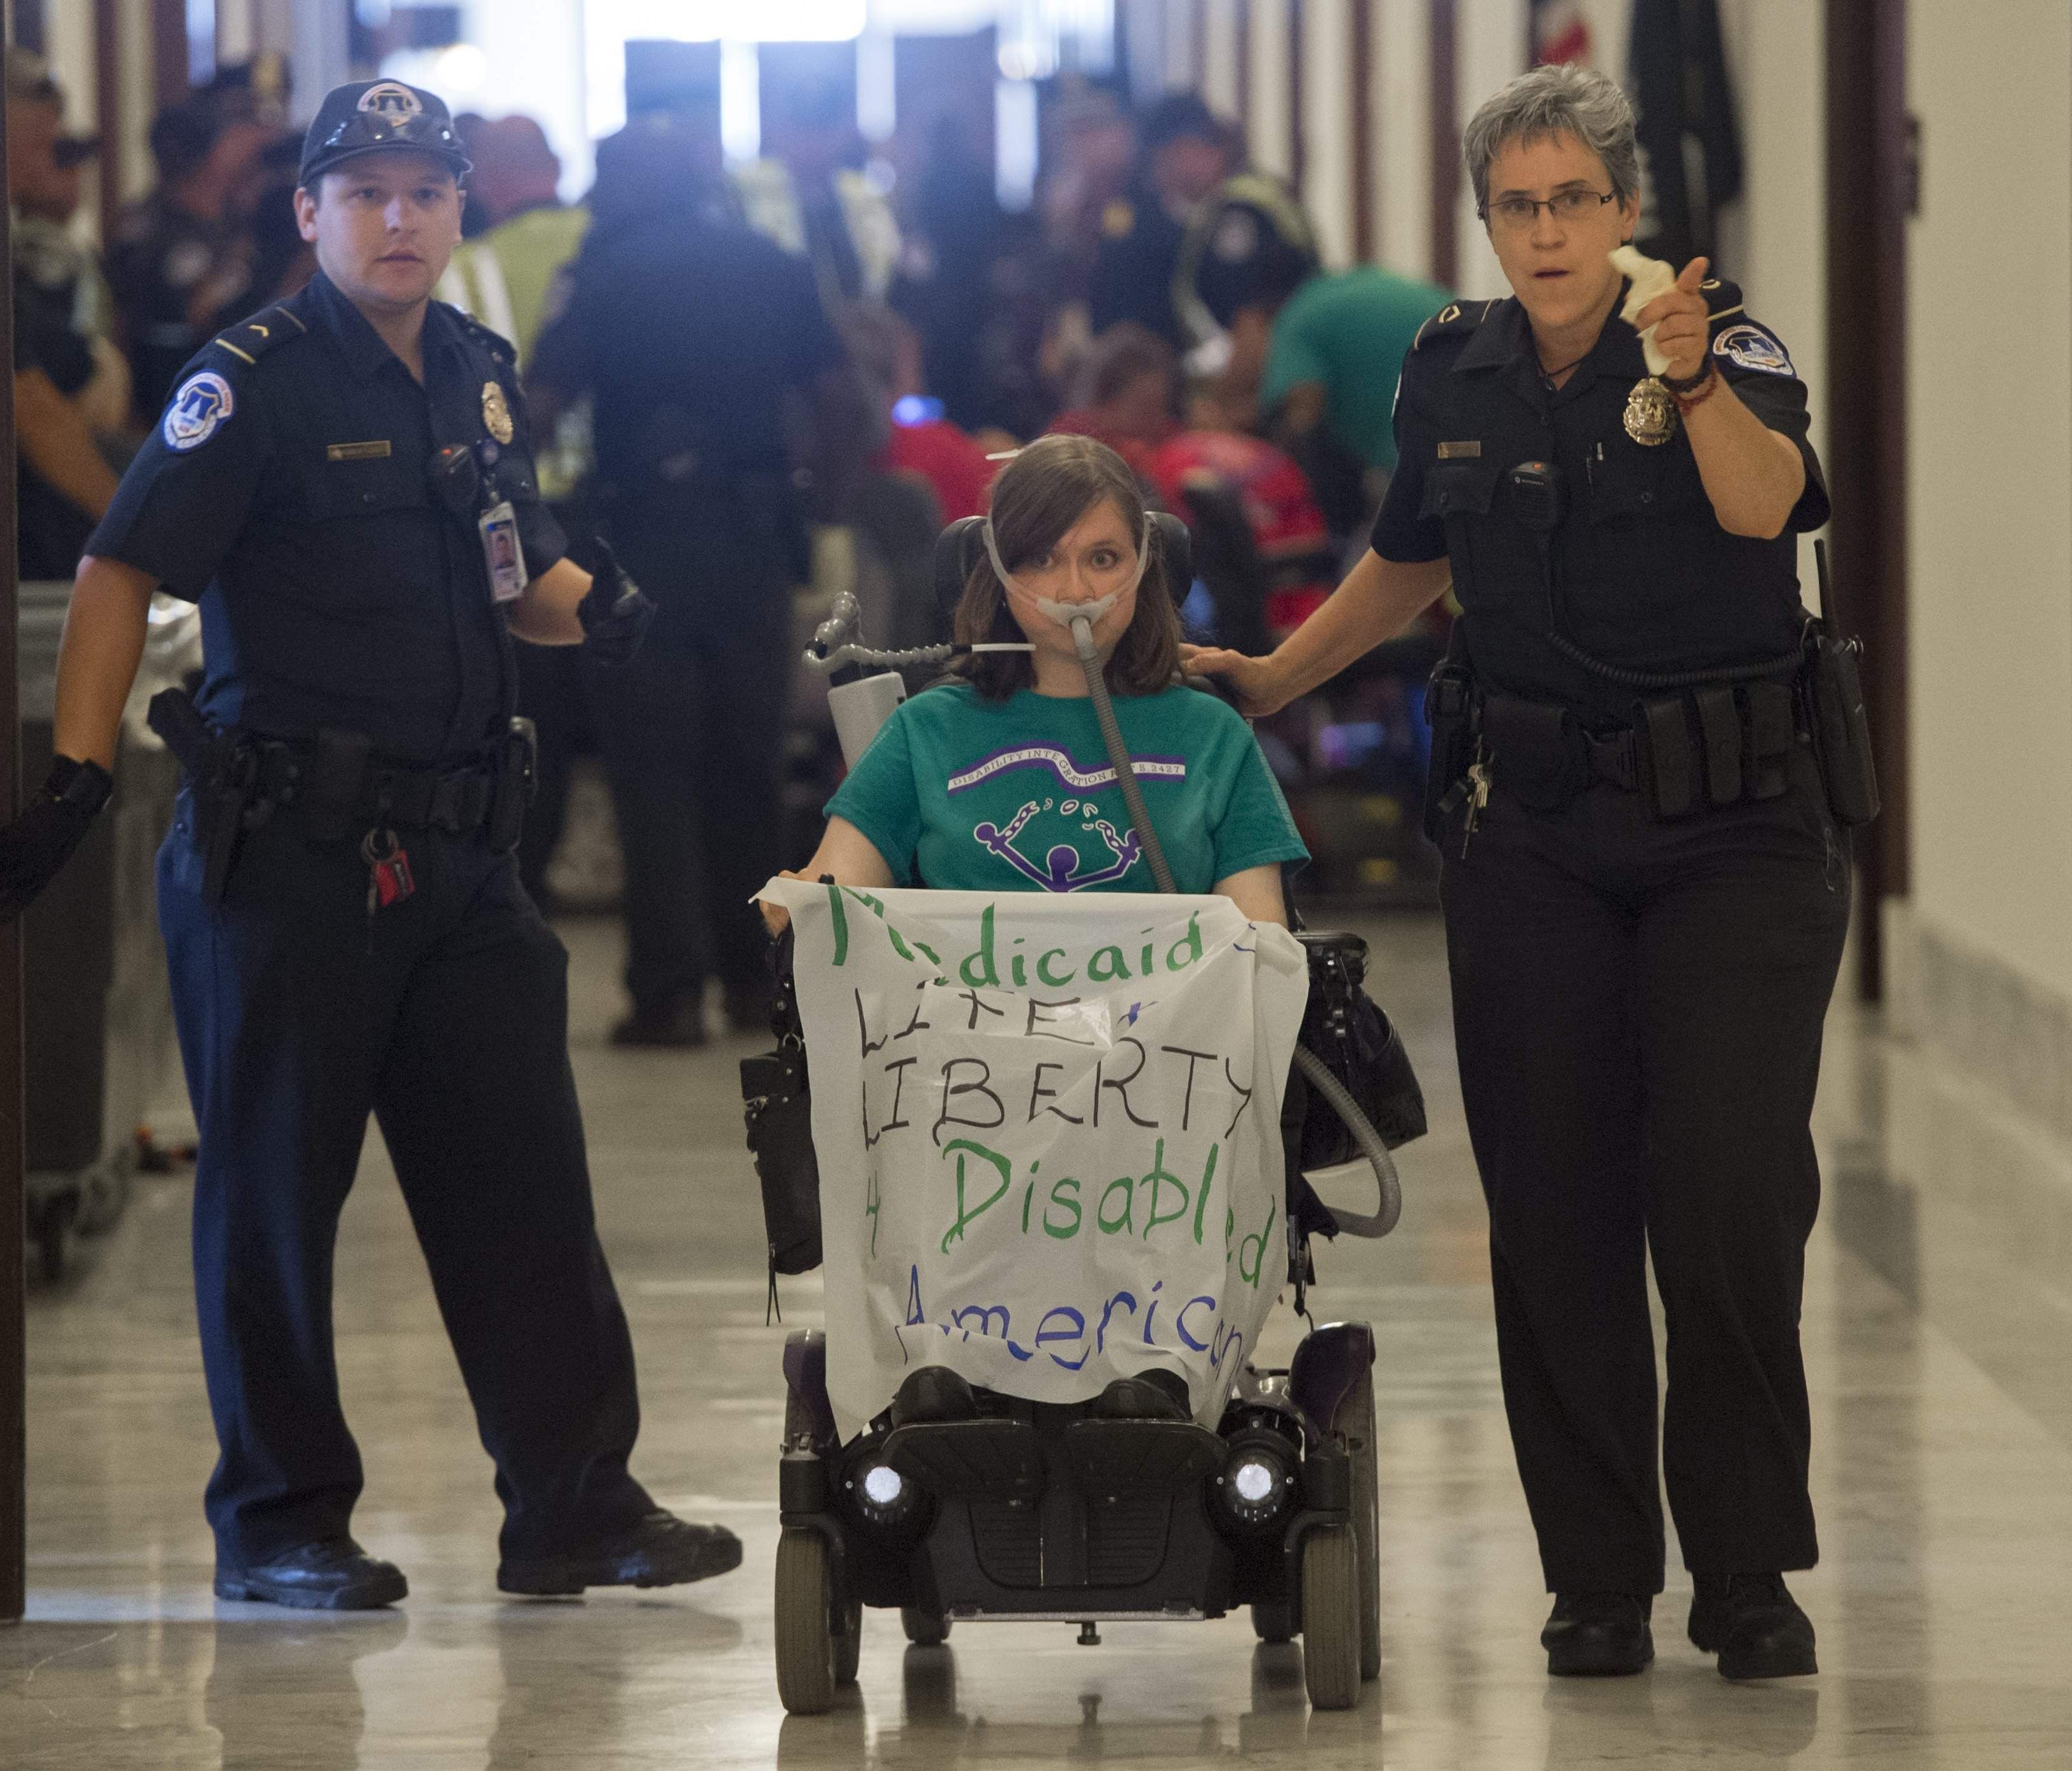 U.S. Capitol Police arrest a health care protester outside the office of Senate Majority Leader Mitch McConnell on June 22, 2017.